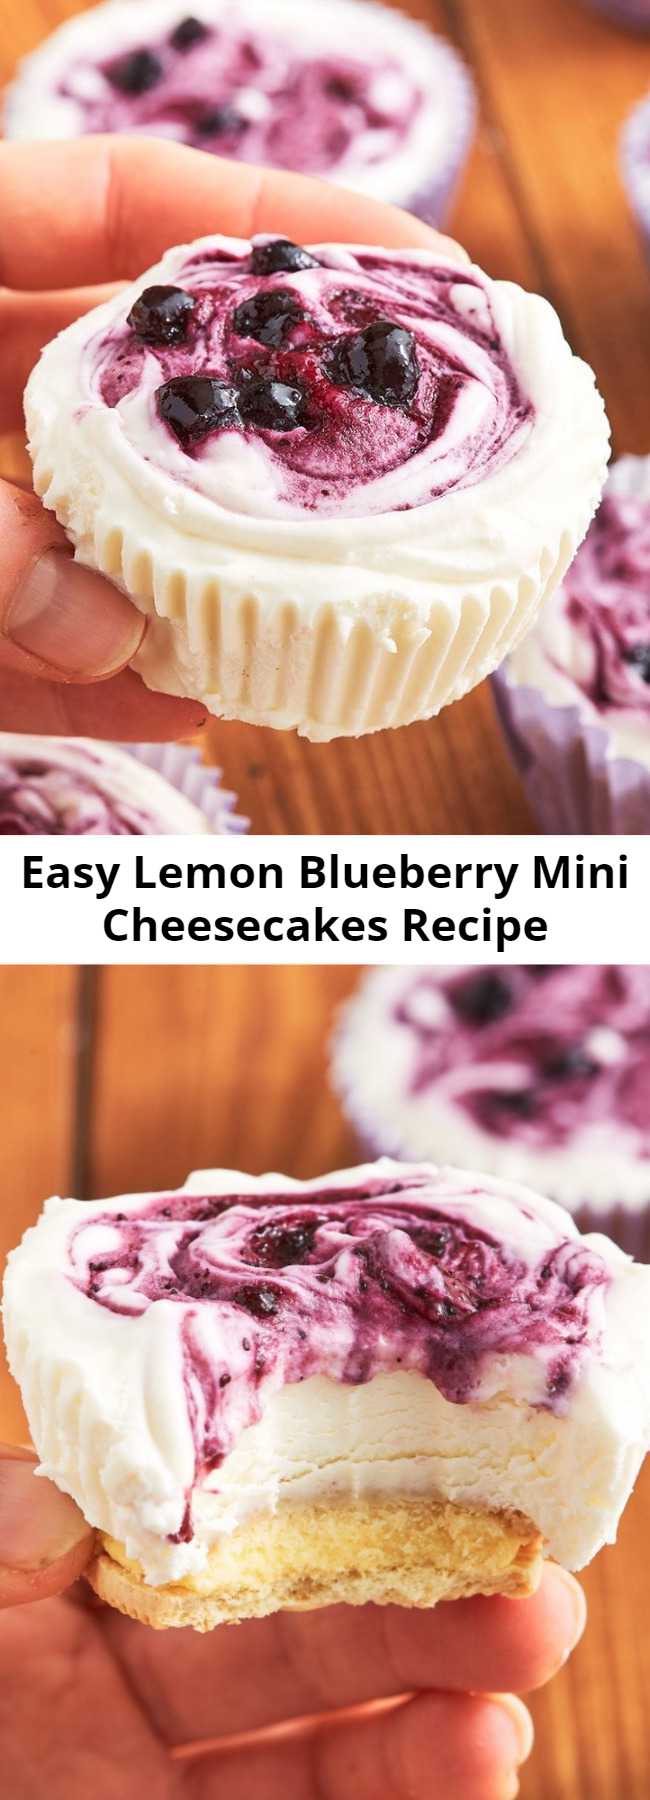 Easy Lemon Blueberry Mini Cheesecakes Recipe - These Lemon Blueberry Mini Cheesecakes are the perfect tiny dessert to satisfy your sweet tooth without going overboard. Sweet blueberry jam and tart lemon go together perfectly in these cheesecakes Mini cheesecakes, MASSIVE flavor. #lemon #blueberry #lemonblueberry #cheesecakes #minidesserts #cheesecakedesserts #partydesserts